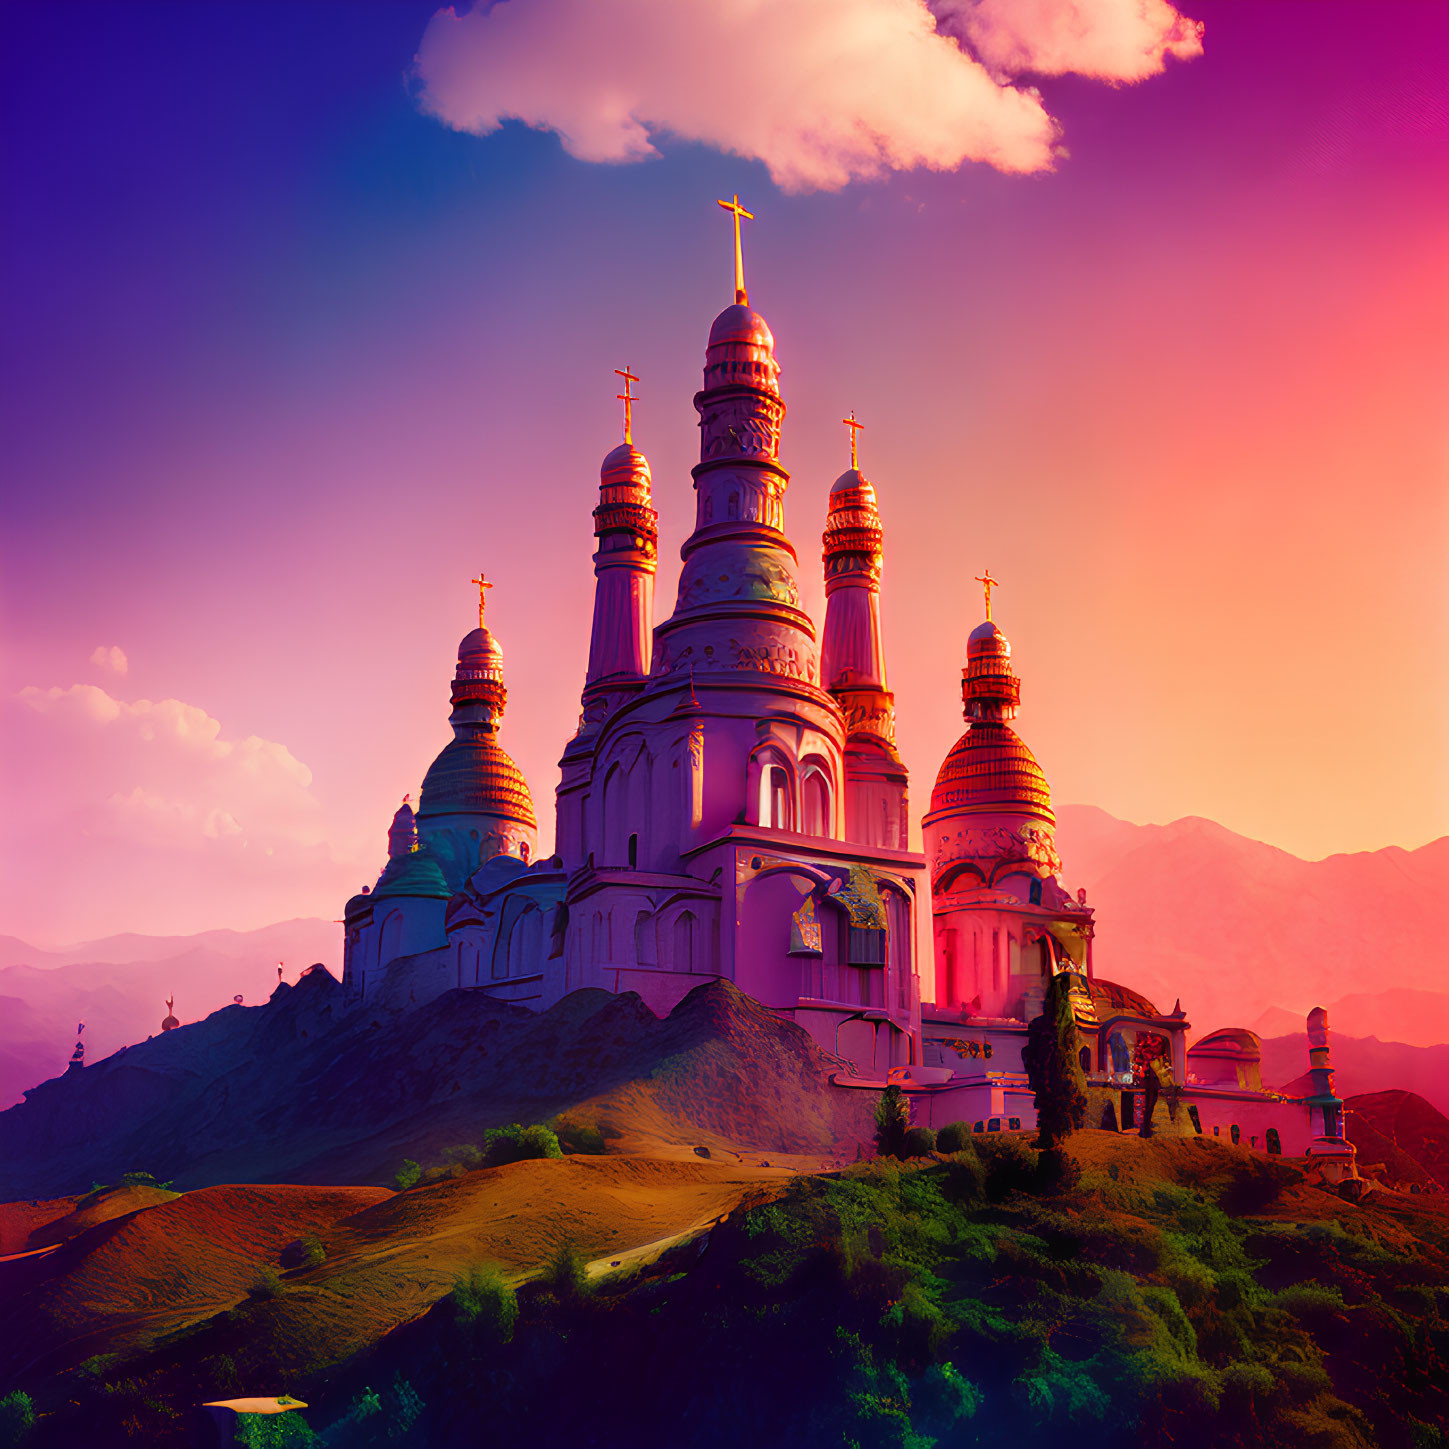 Ornate cathedral with golden domes against mountain sunset